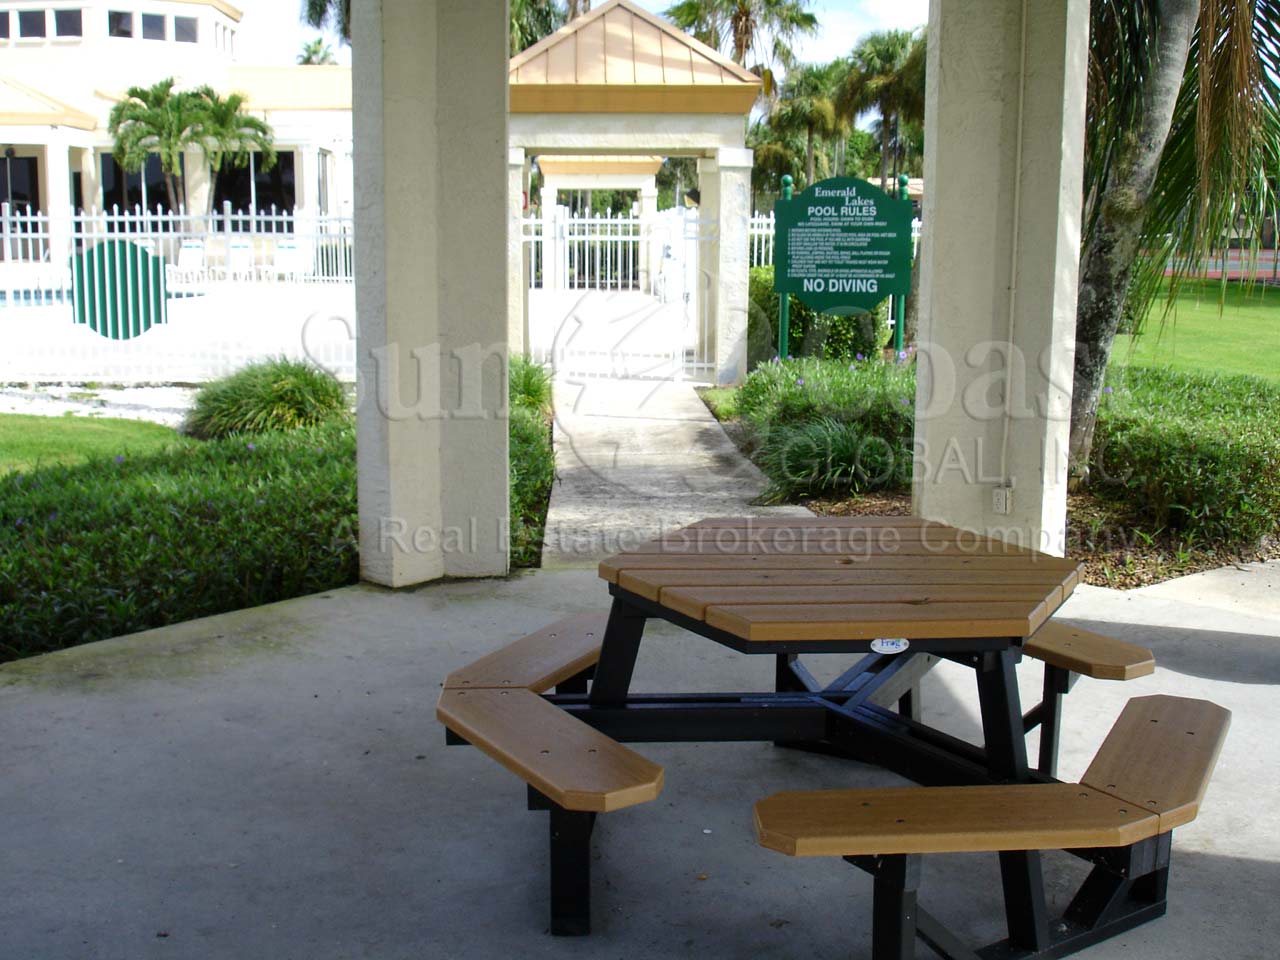 EMERALD LAKES Patio Area in front of Community Pool 